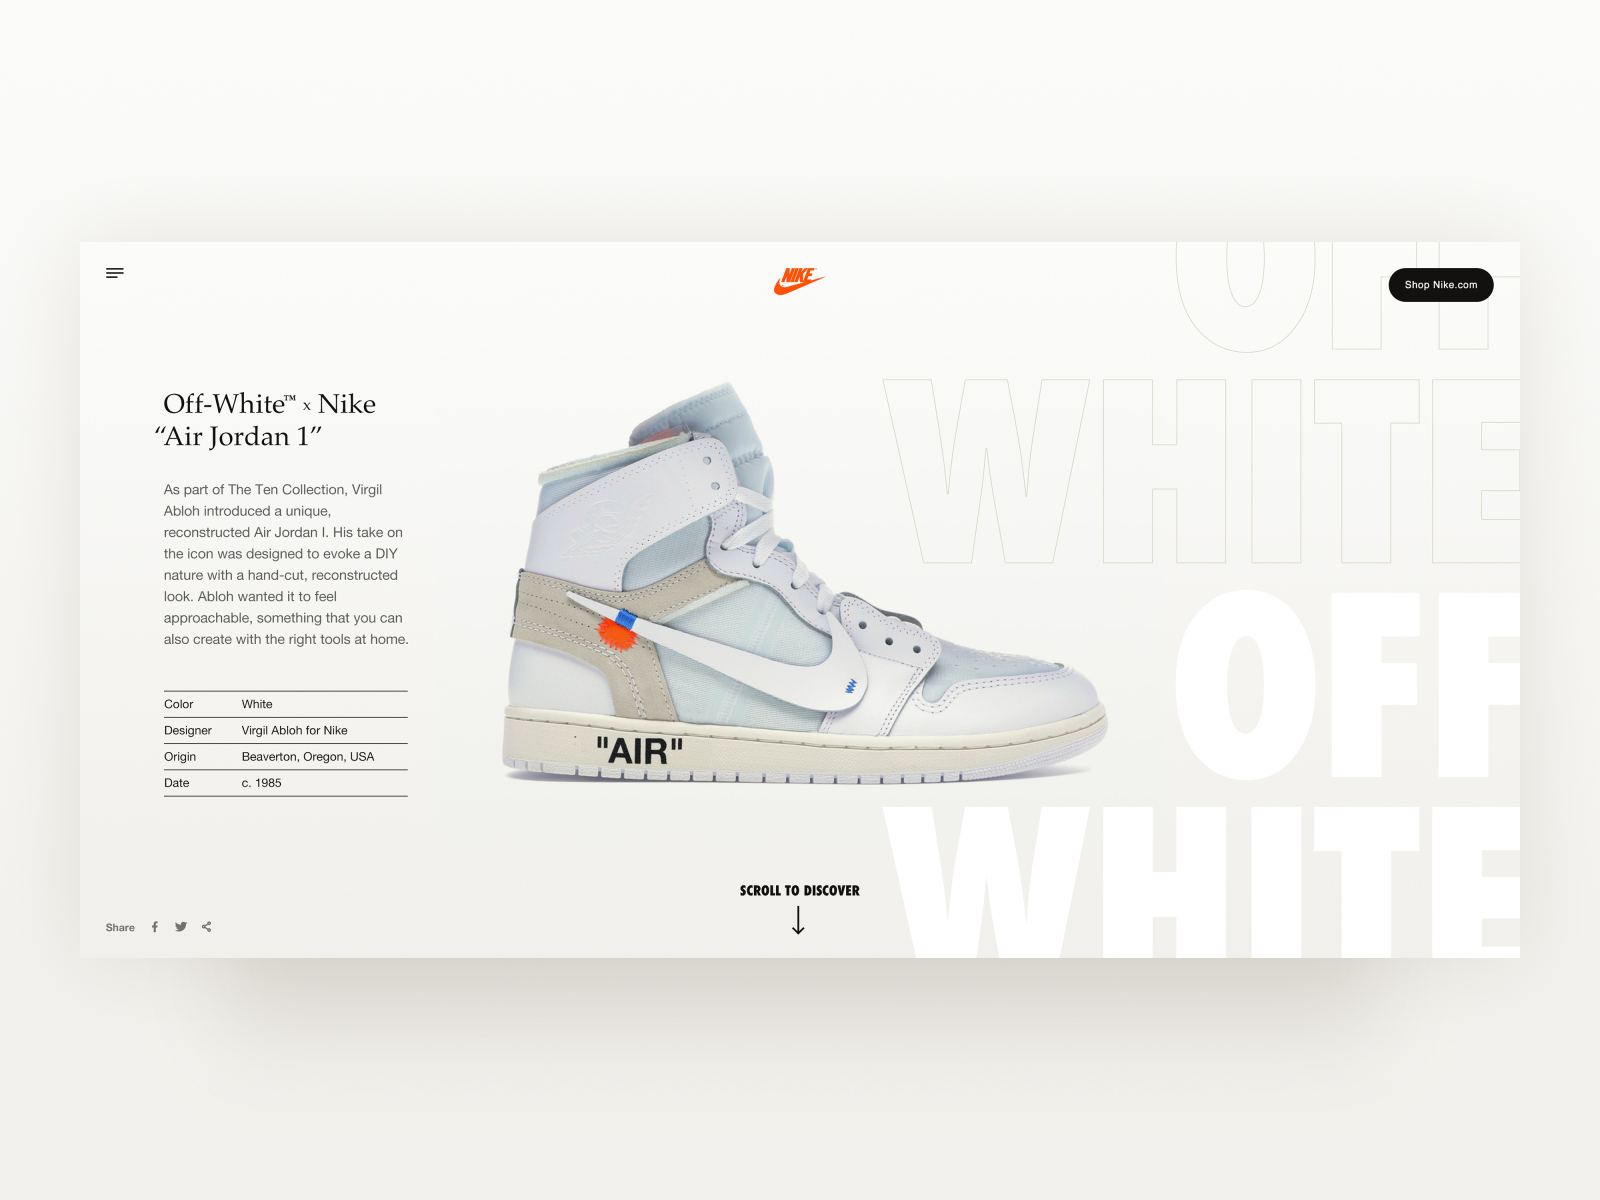 AllVirtualEdits on Twitter NEW DESIGN  OffWhite X Nike collection  poster now available With 8 of the best sneakers from this colab  Available for purchase on poster print or canvas Get in